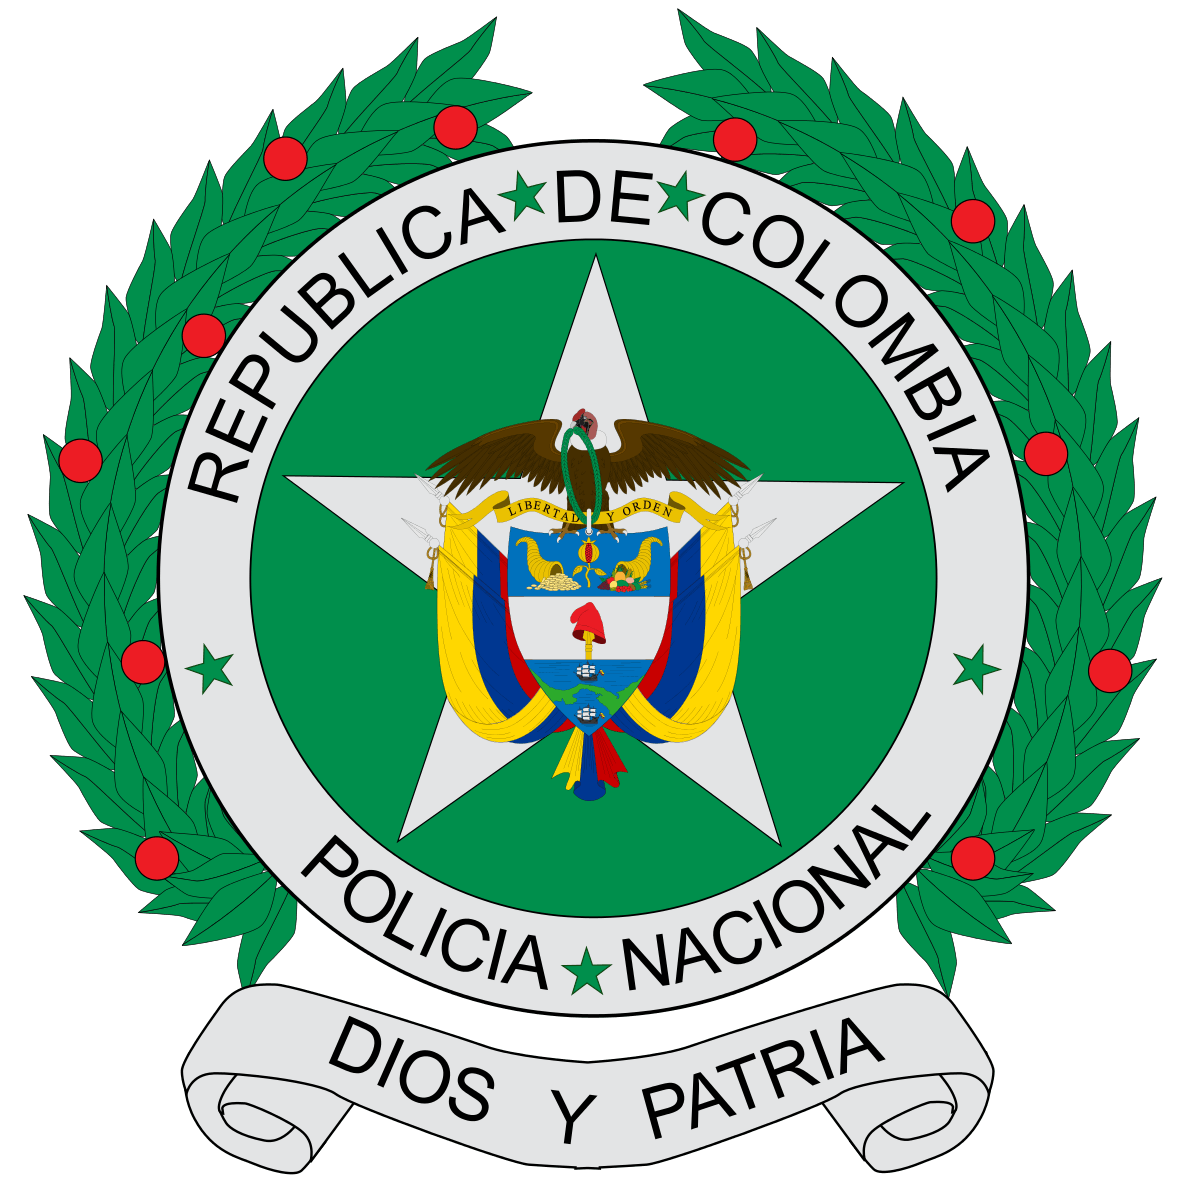 Colombia Logo - National Police of Colombia